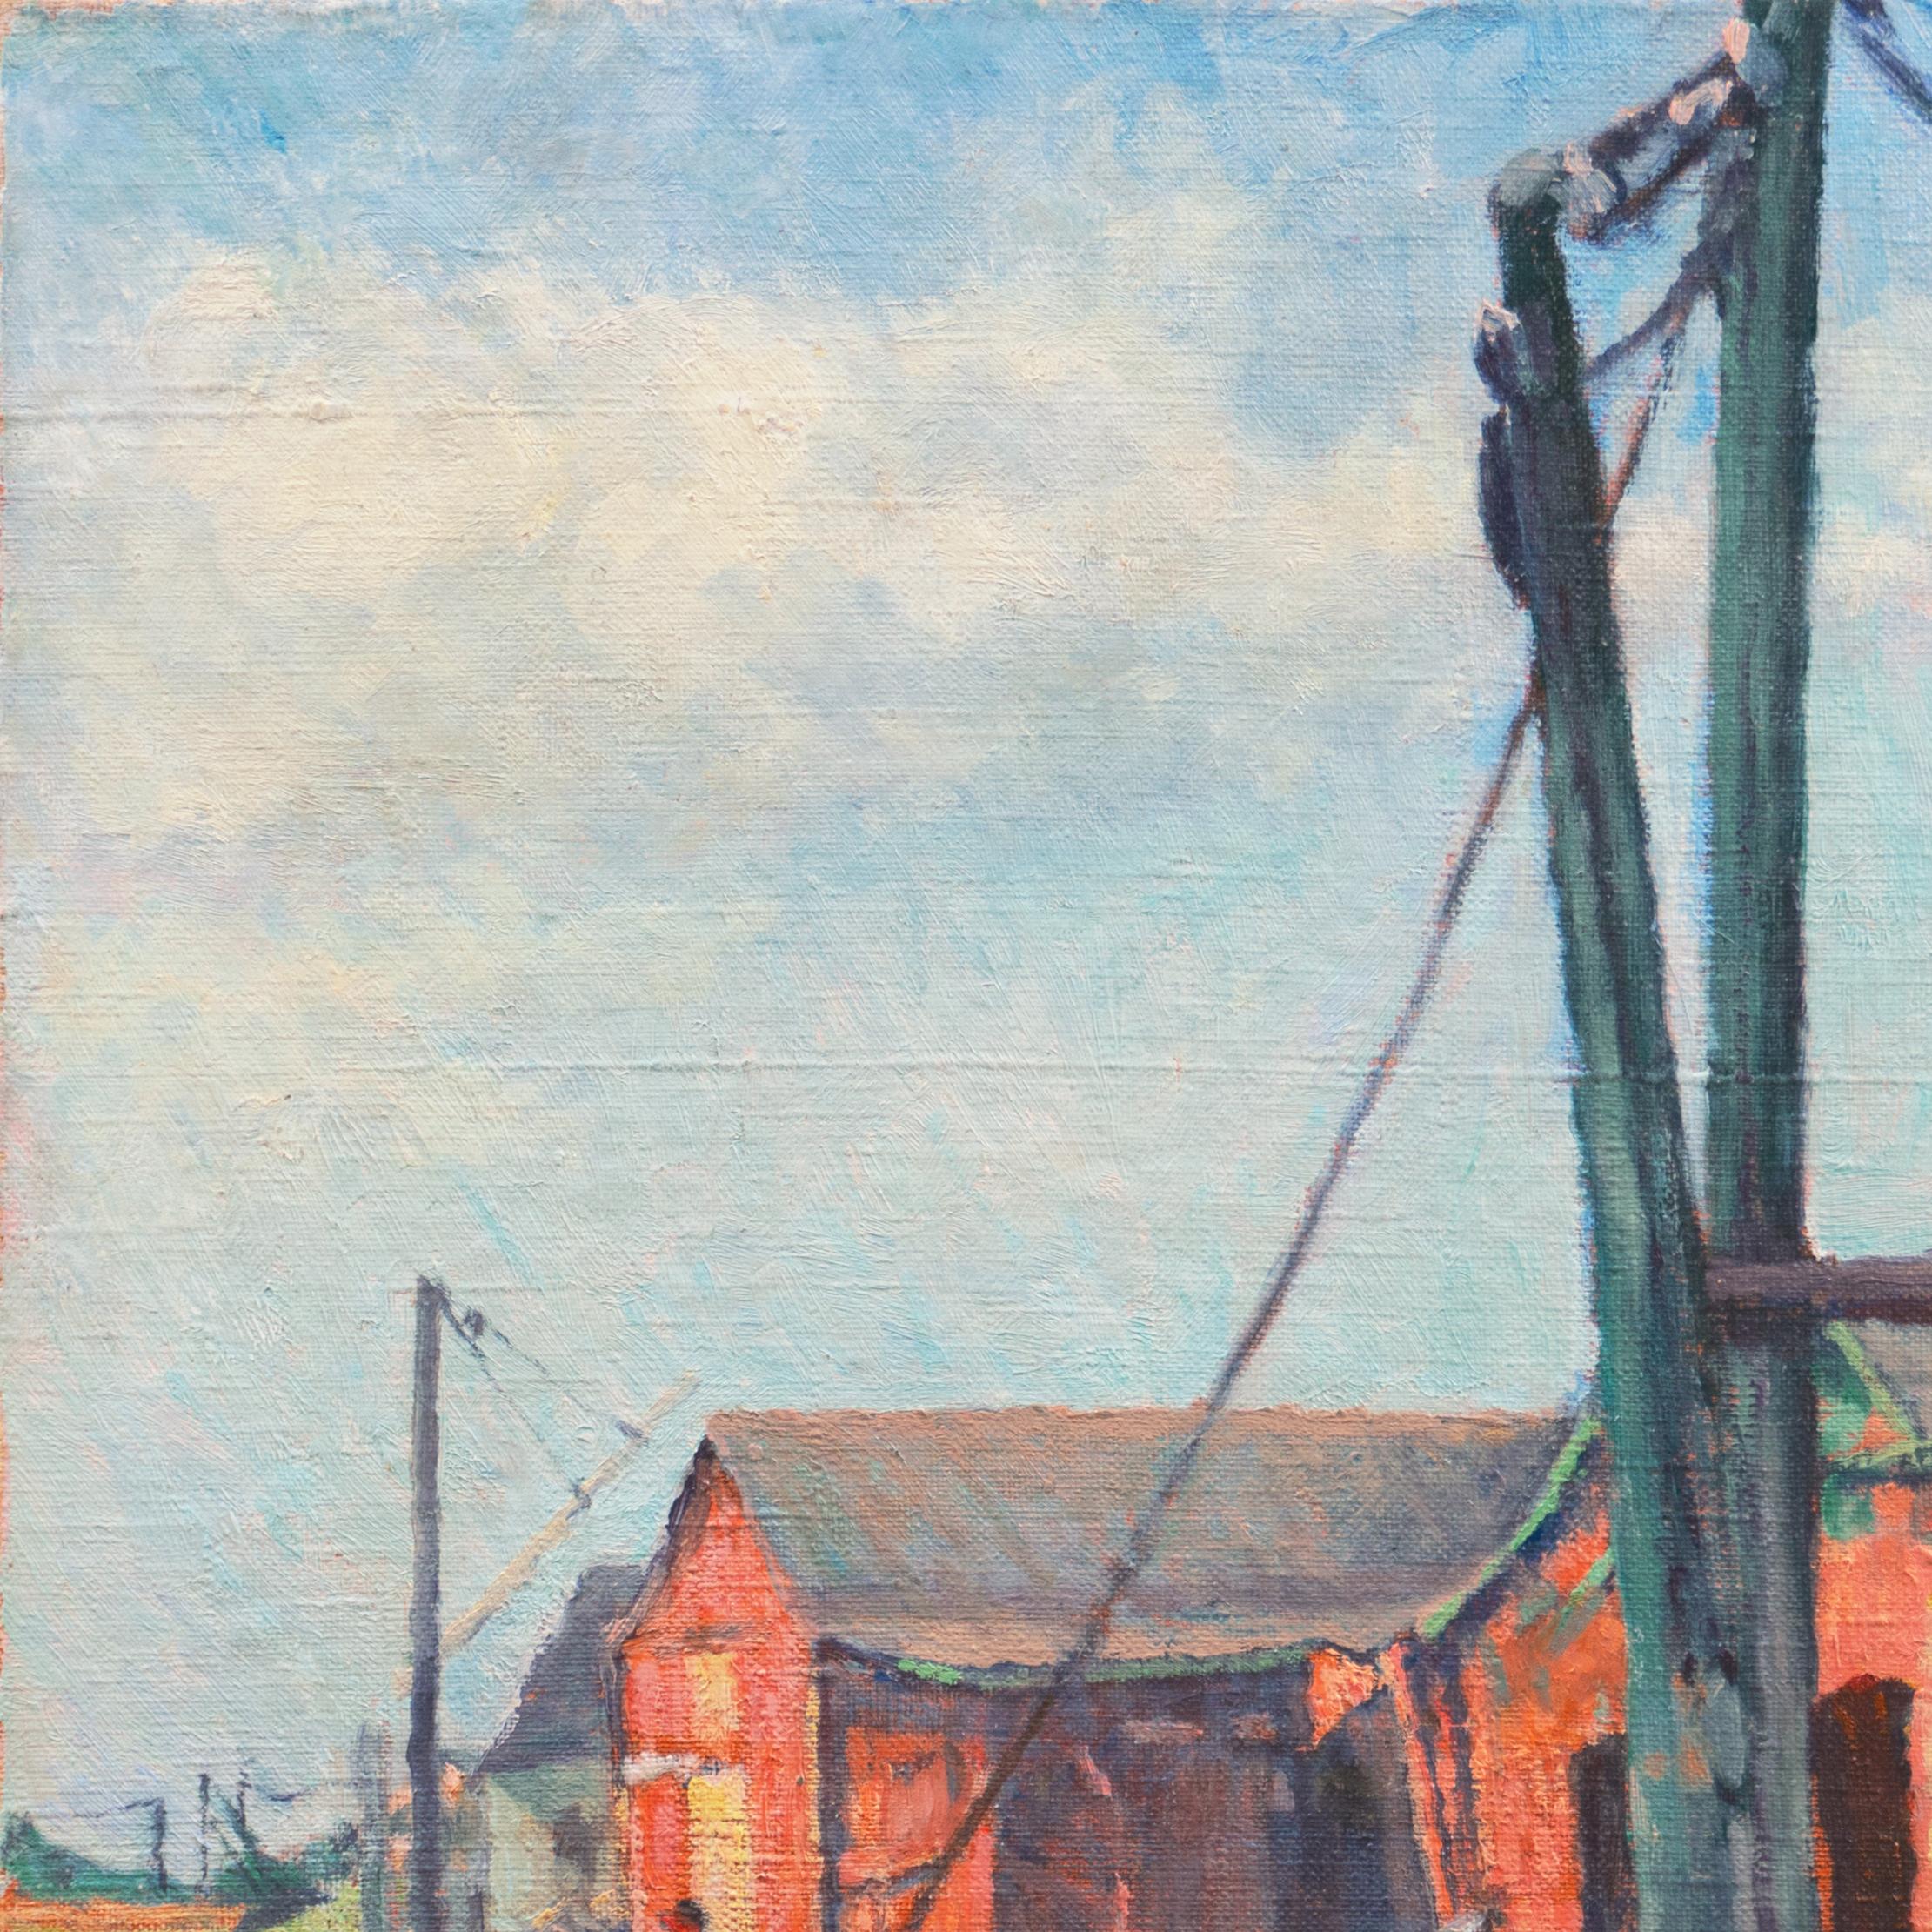 An unsigned, early twentieth century oil showing a view of an old wooden wharf with longshoremen working.  A well-composed work by an anonymous but skilled hand; painted circa 1925.